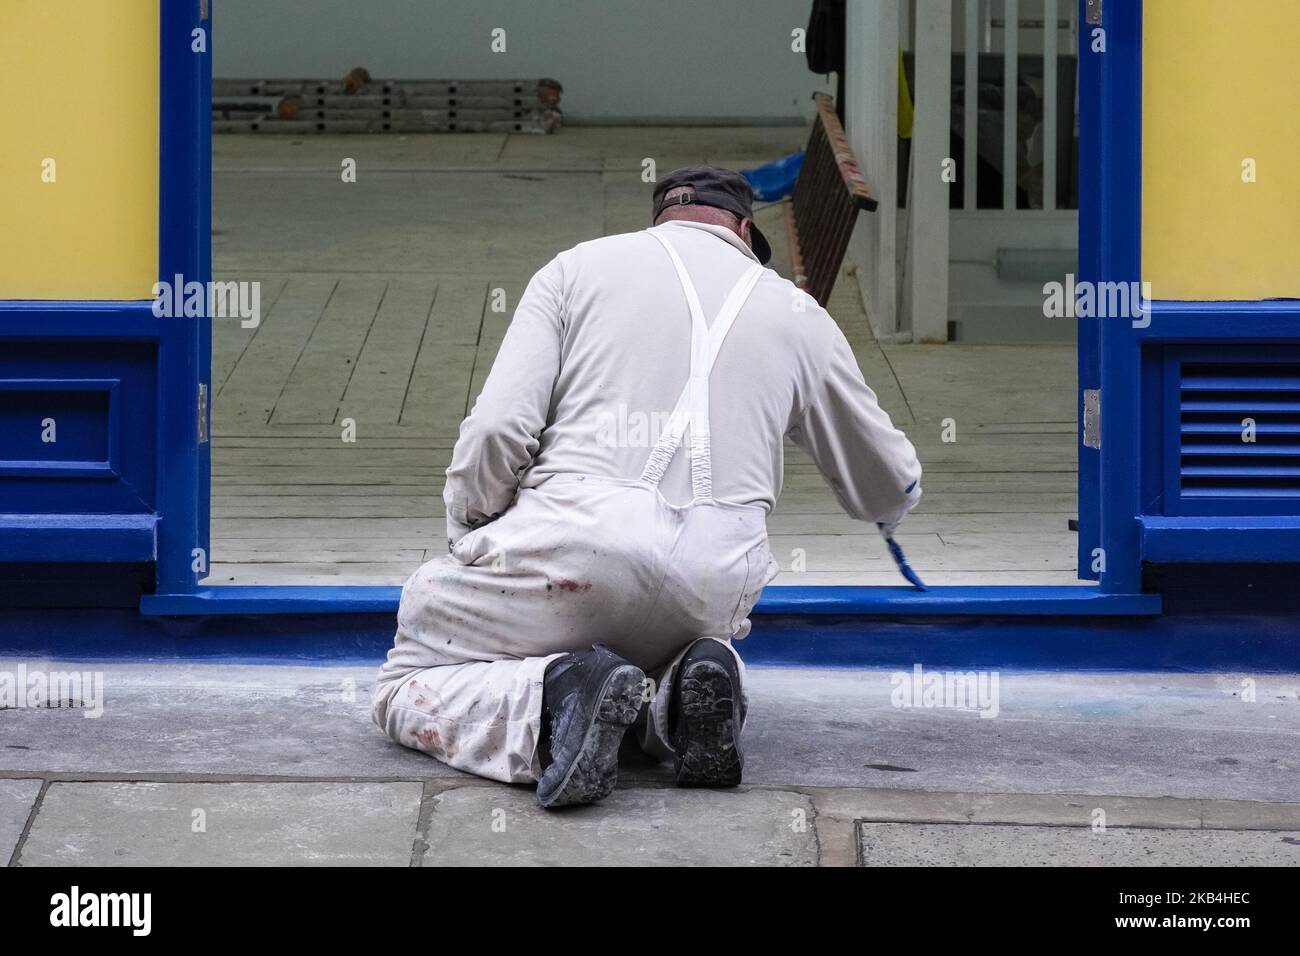 Man painting door frame entrance to the building Stock Photo